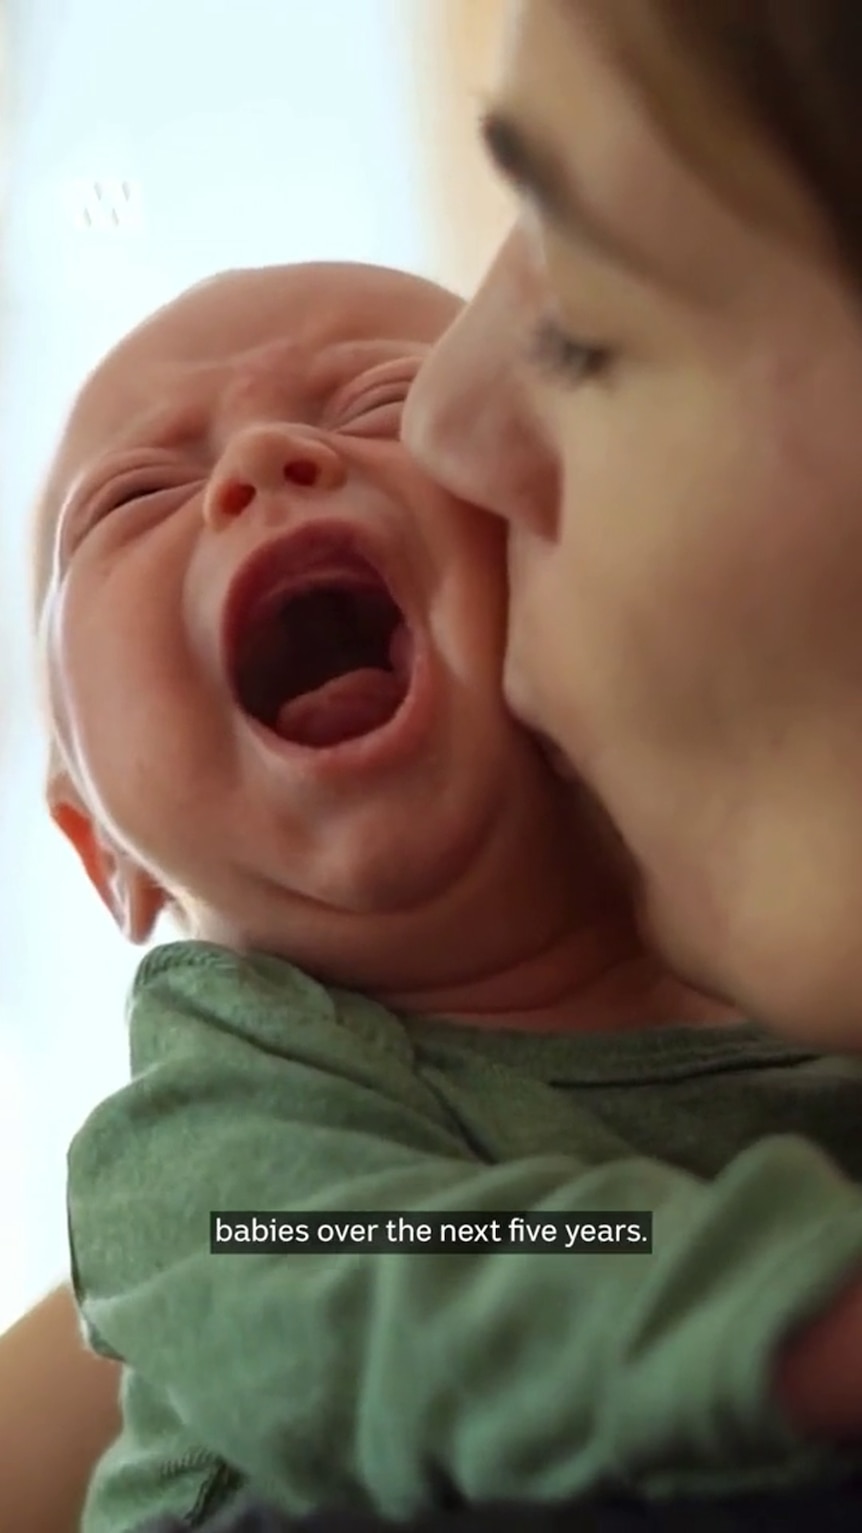 a tight shot shows a woman kissing a baby dressed in green with its mouth open